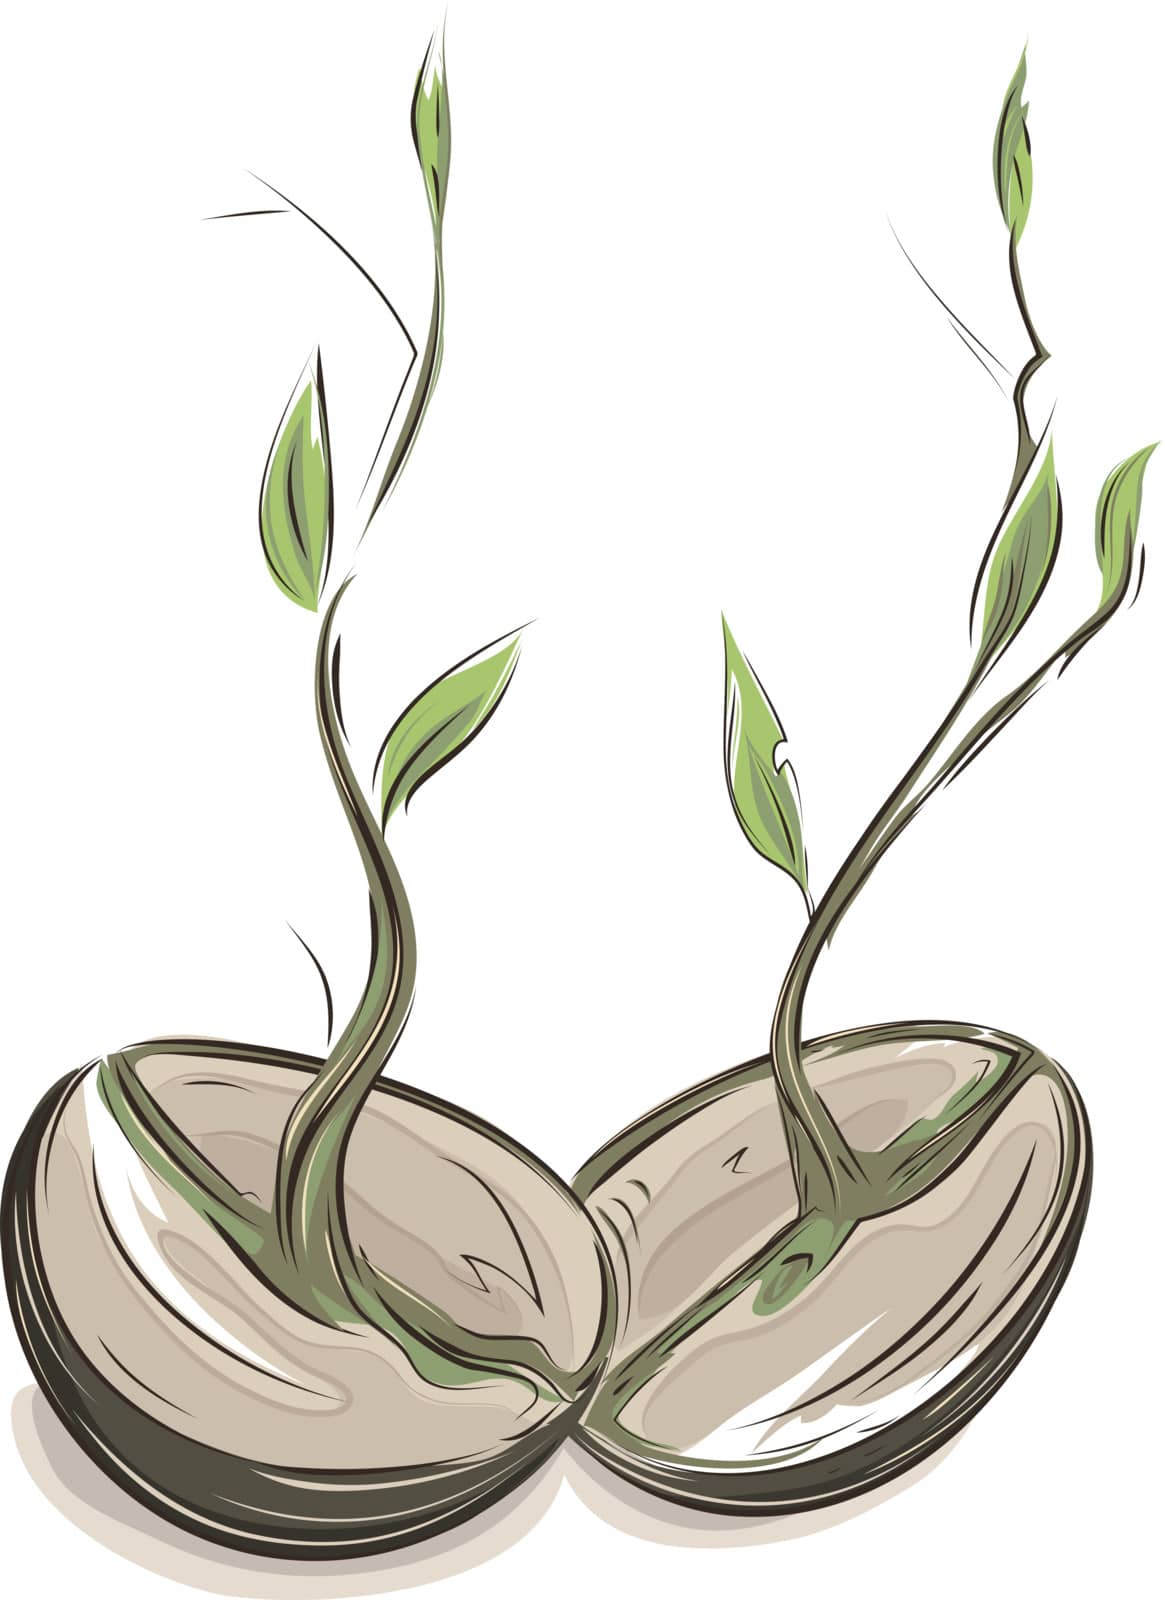 Sprouting hand drawn watercolor style beans illustration. EPS8 layered vector. No effects.